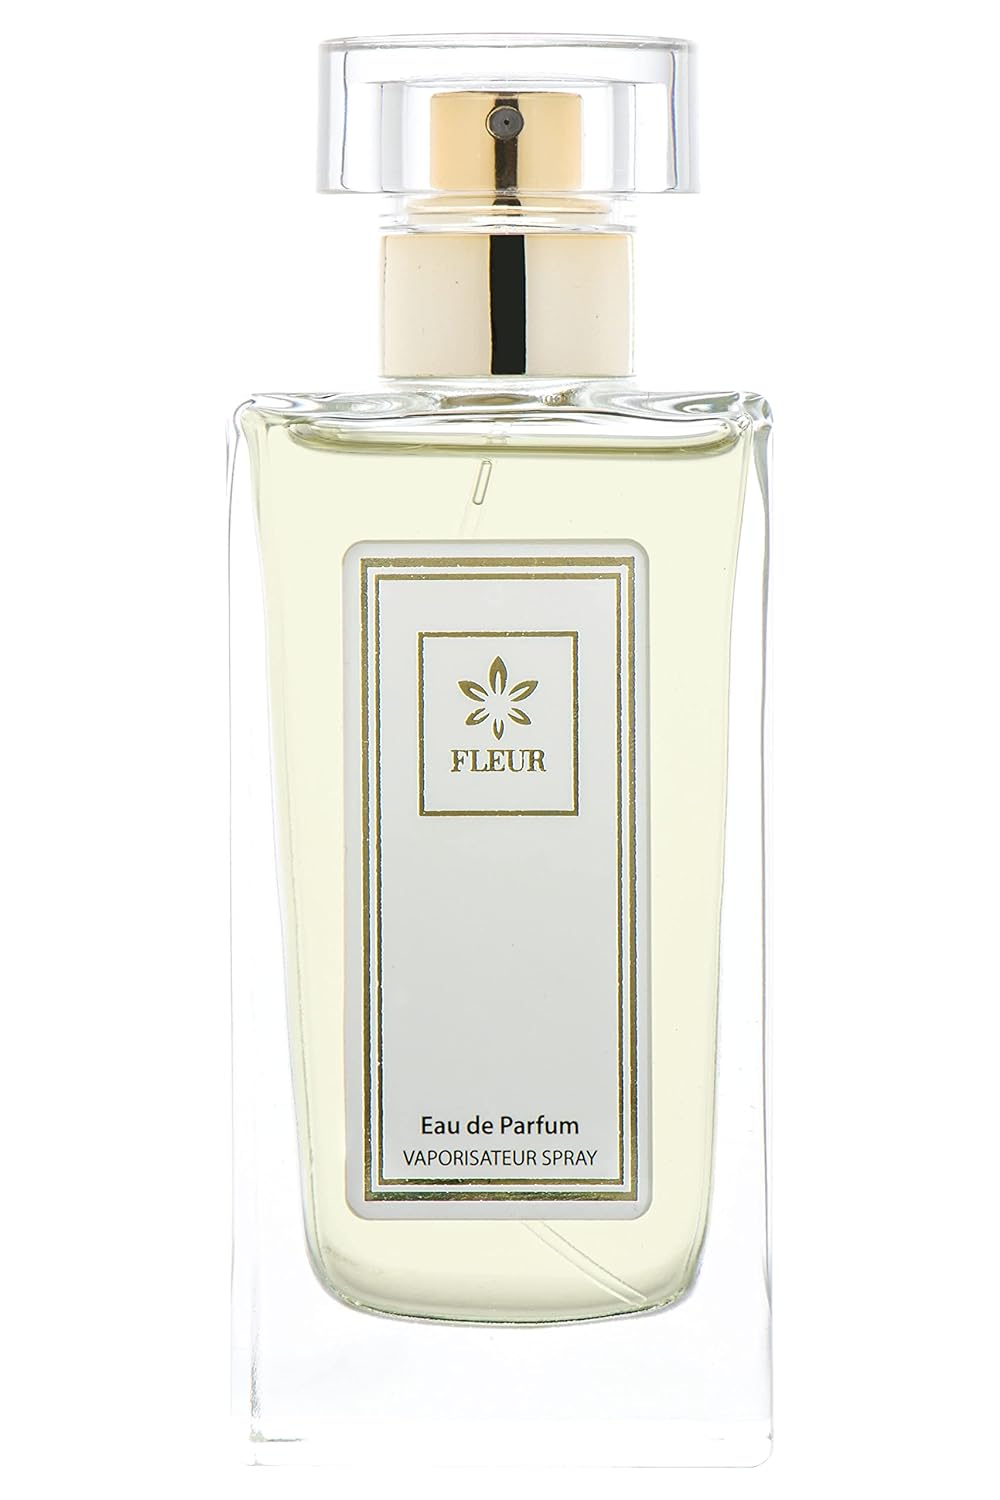 Fleur no 164 inspired by black orchidea perfume dupes for women, fragrance twins, women \ 's fragrance spray 50 ml